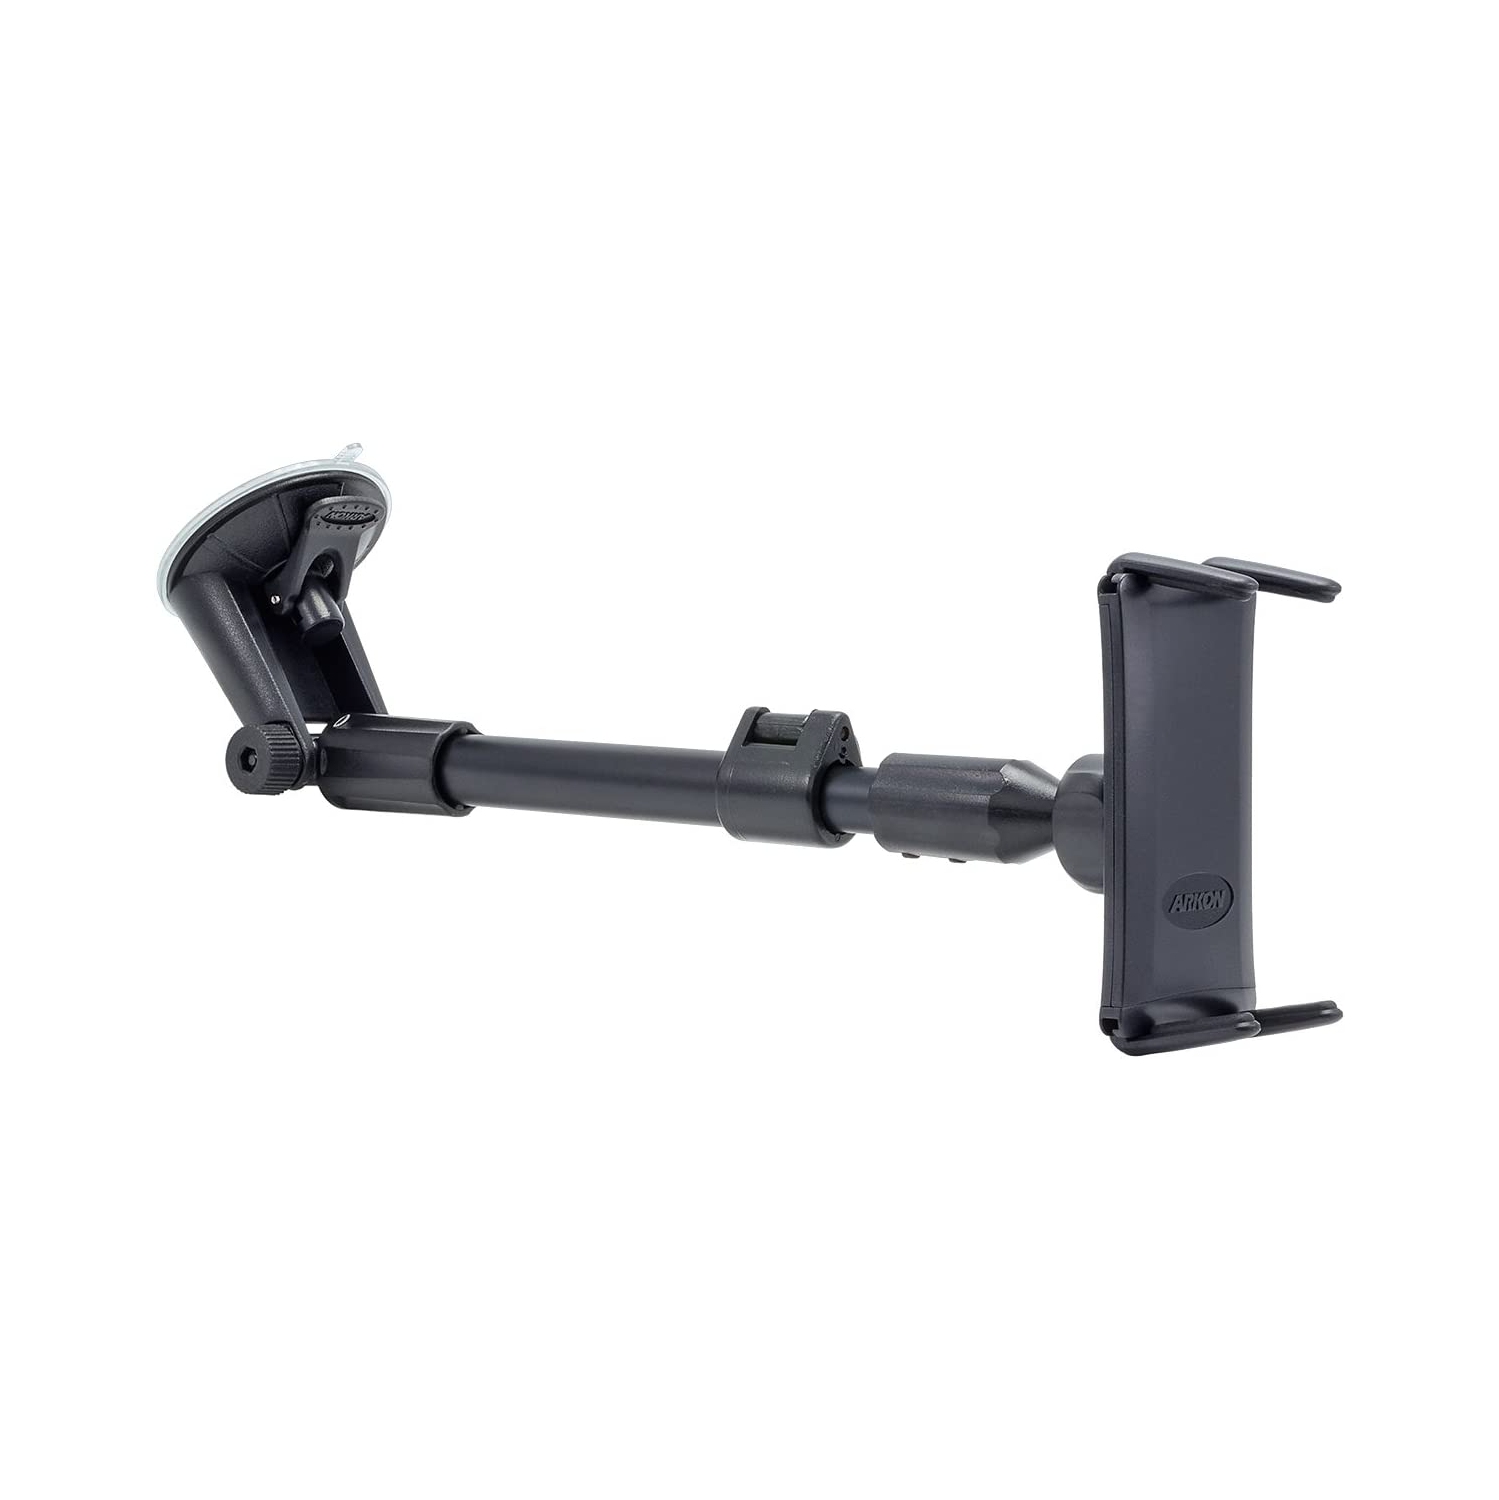 Smartphone and Midsize Tablet Windshield Mount for Apple IPad Mini iPhone 6 Plus 6 5S Samsung Galaxy S6 S5 S4